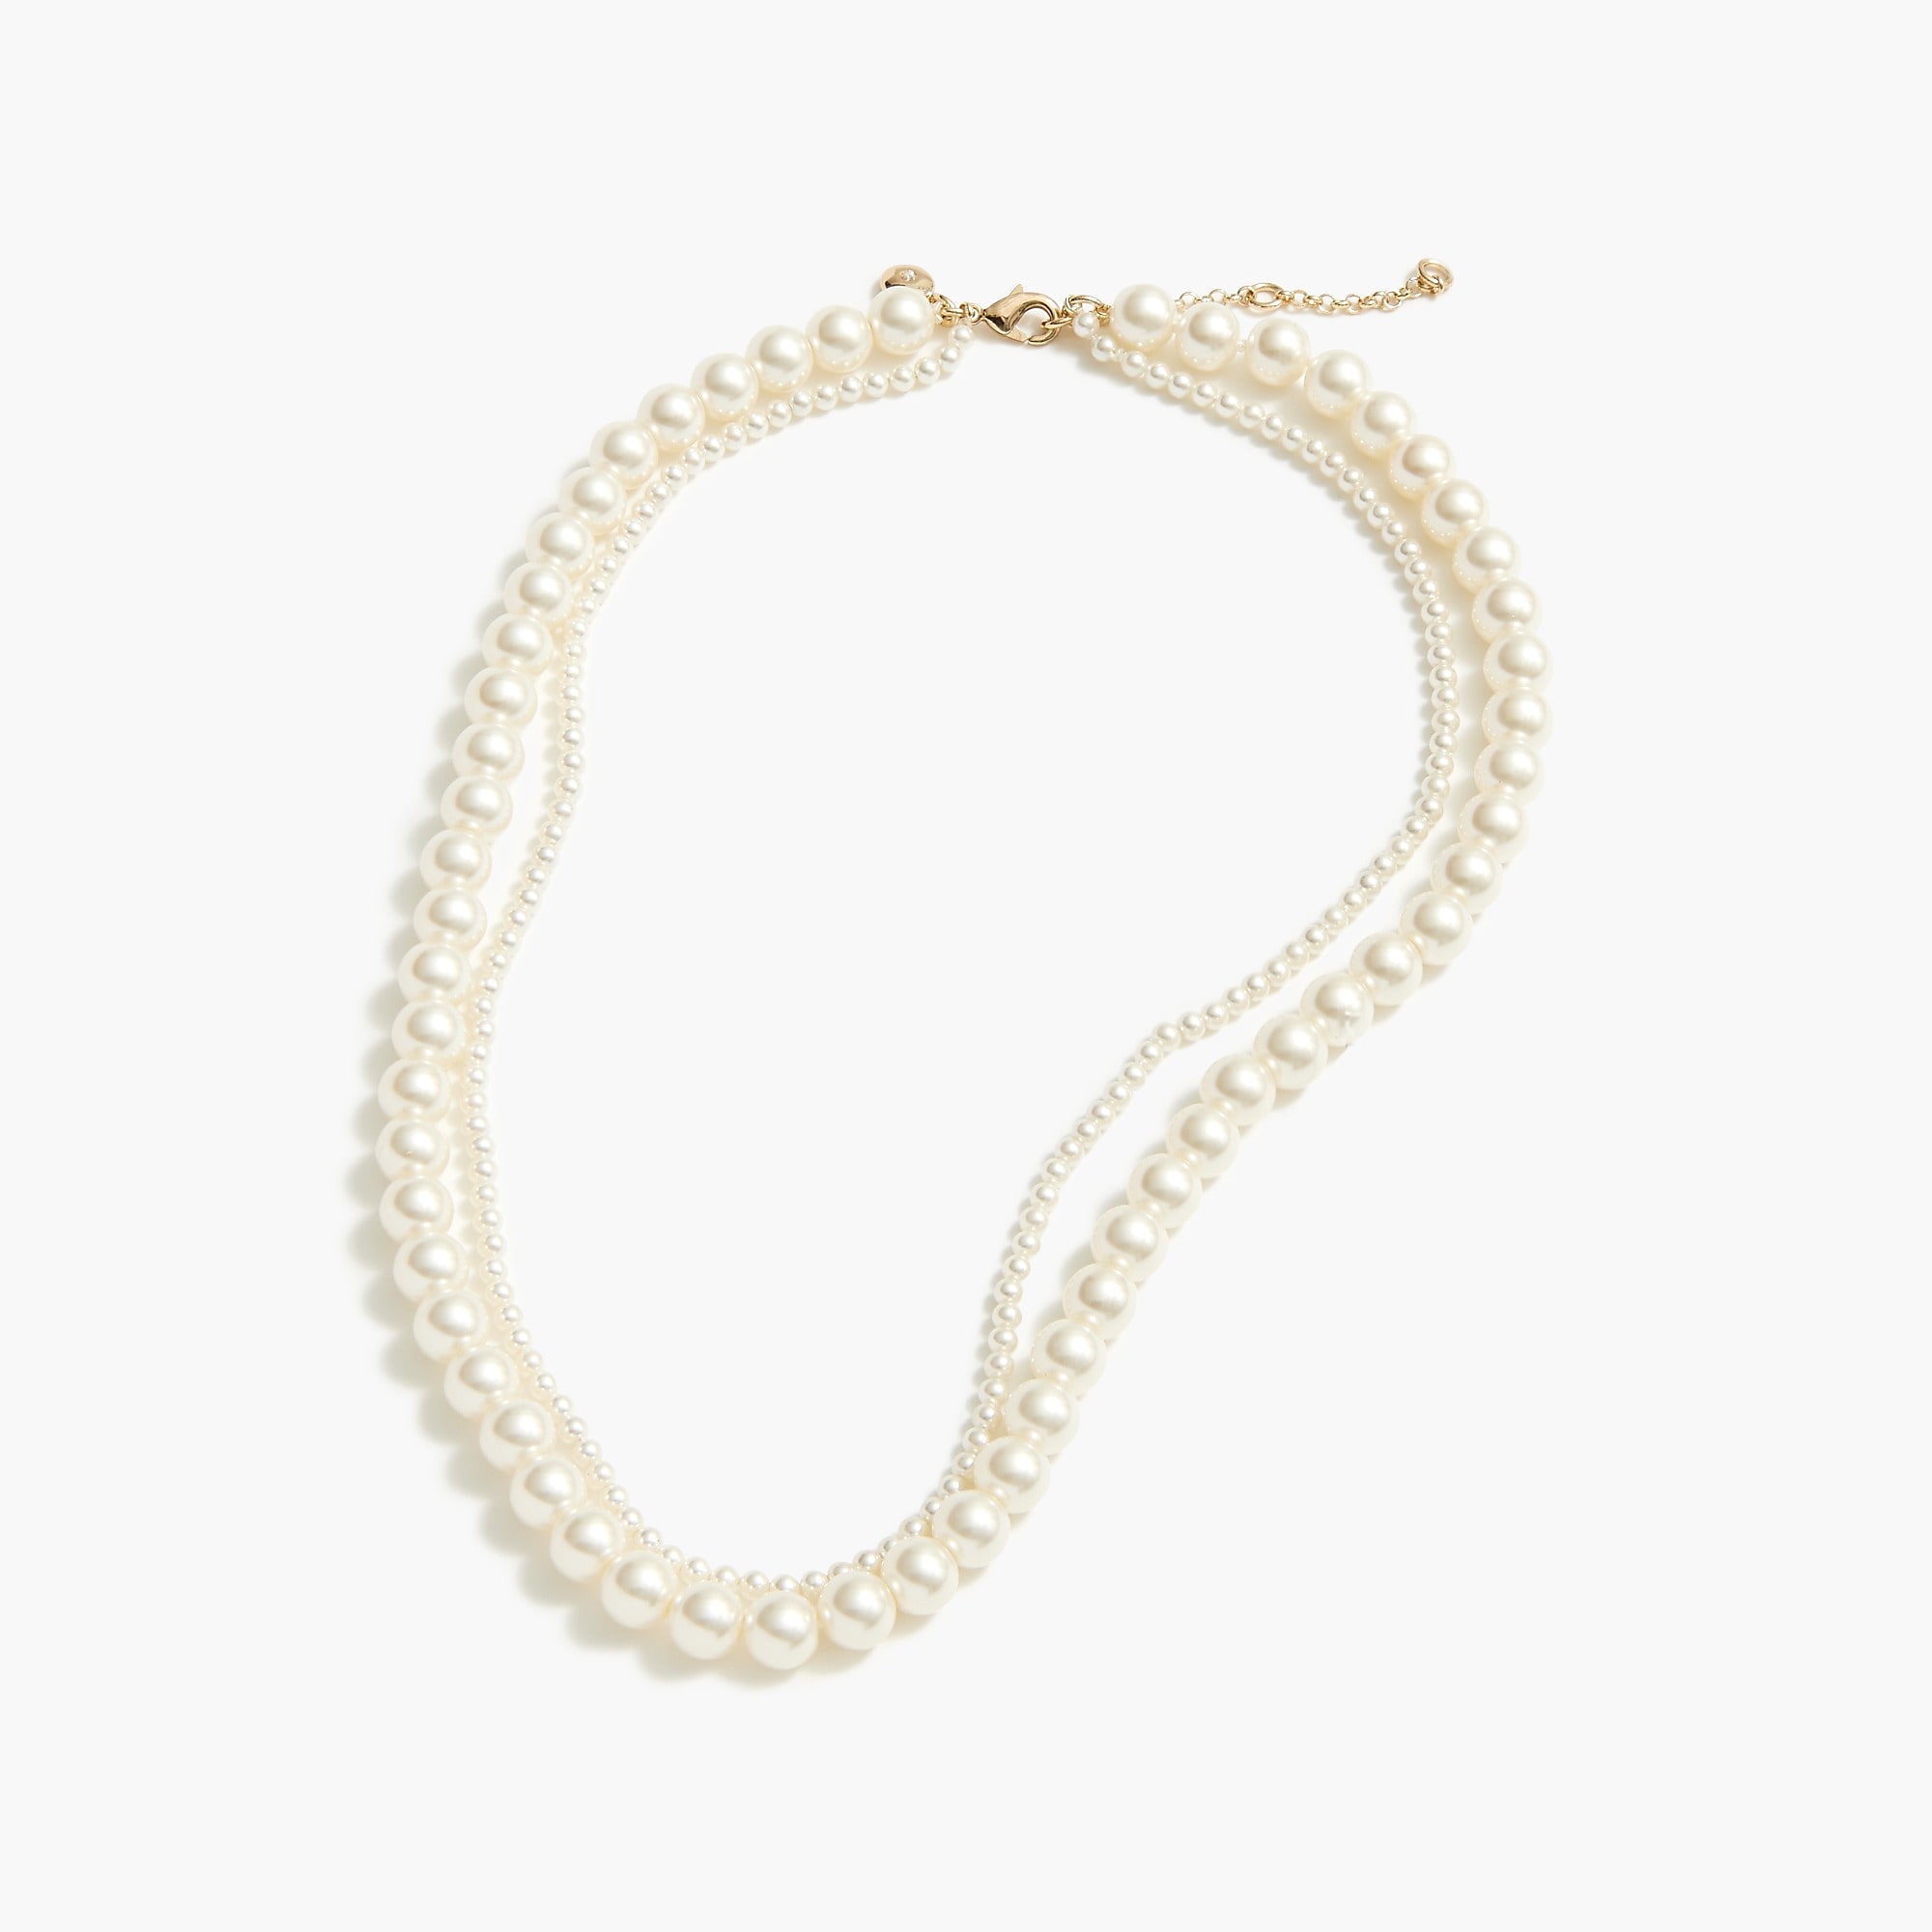 Double Pearl Necklace | $22